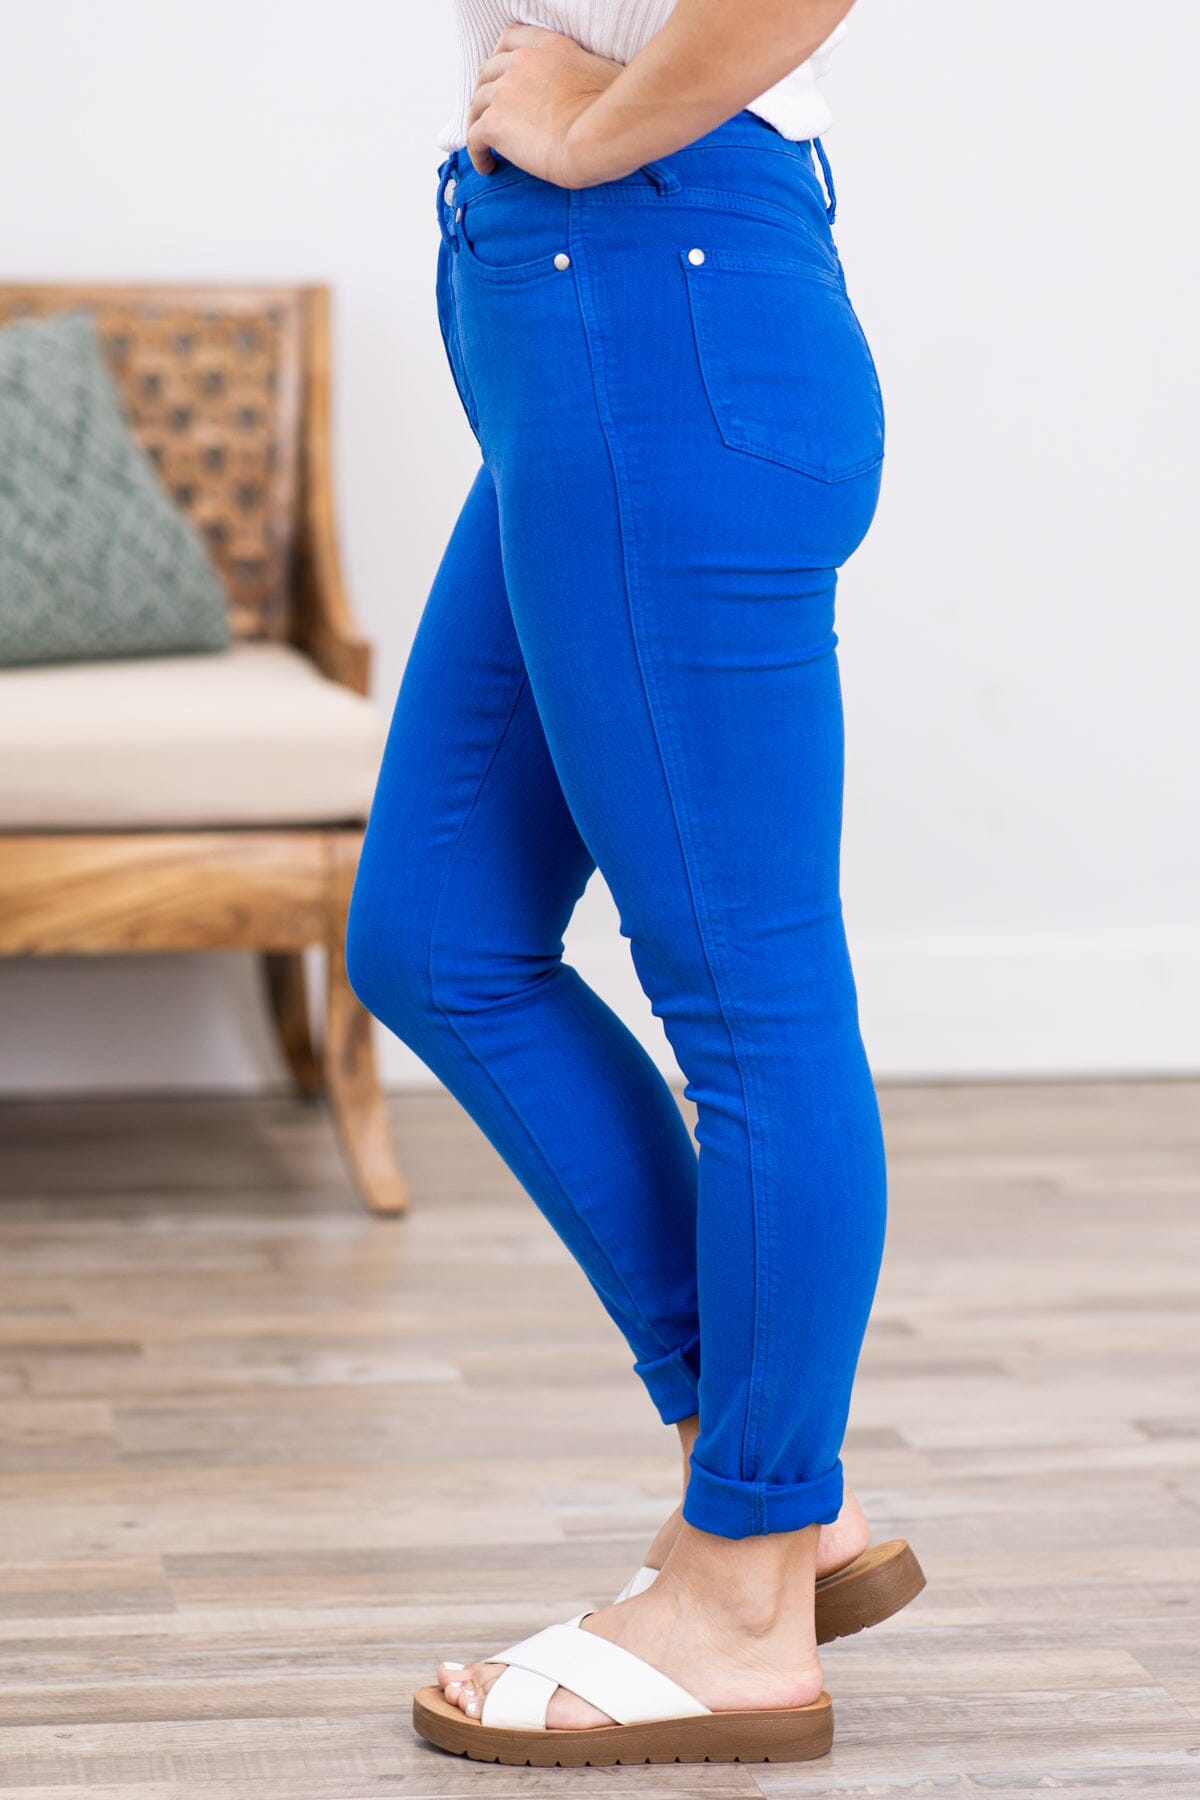 Judy Blue Cobalt Tummy Control Skinny Jeans - Filly Flair